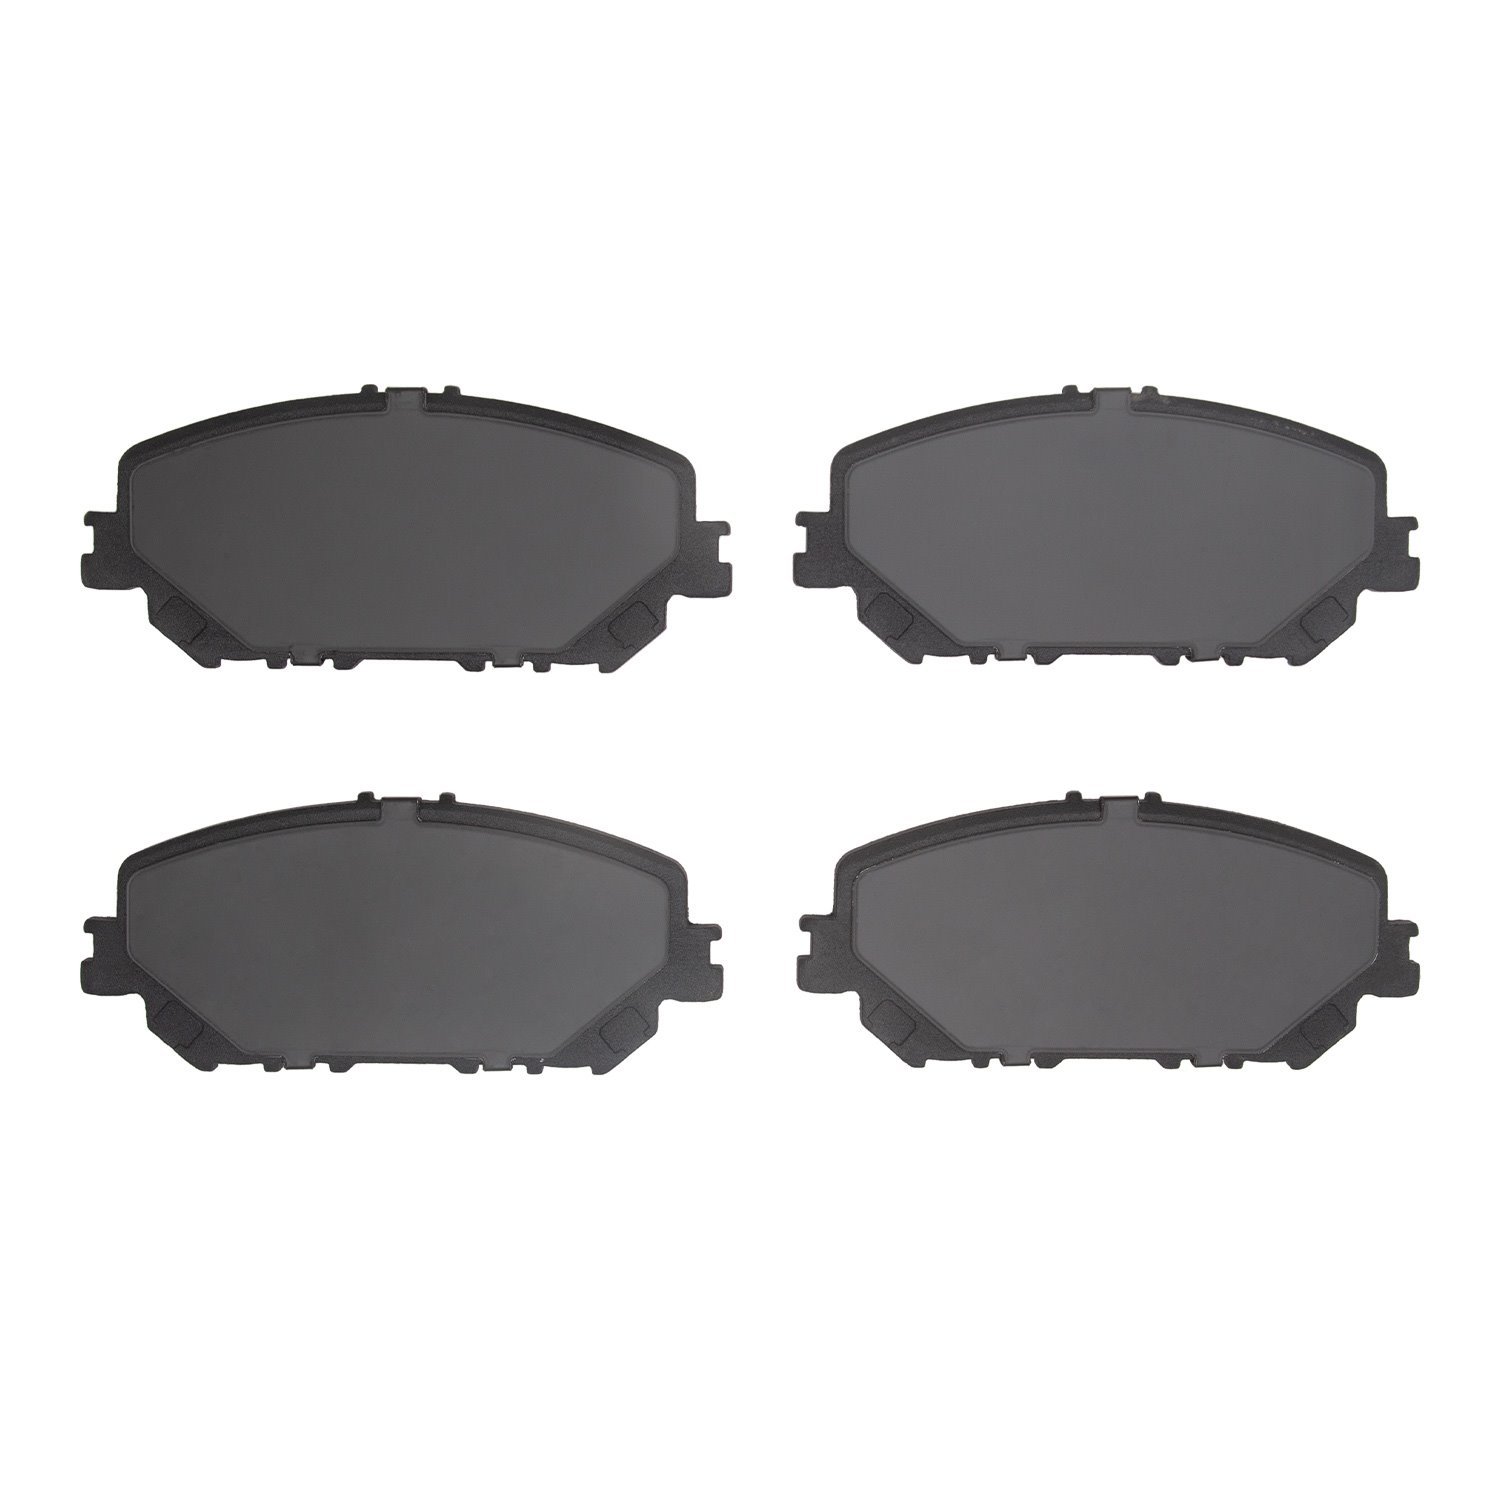 1310-2375-00 3000-Series Ceramic Brake Pads, Fits Select Infiniti/Nissan, Position: Front